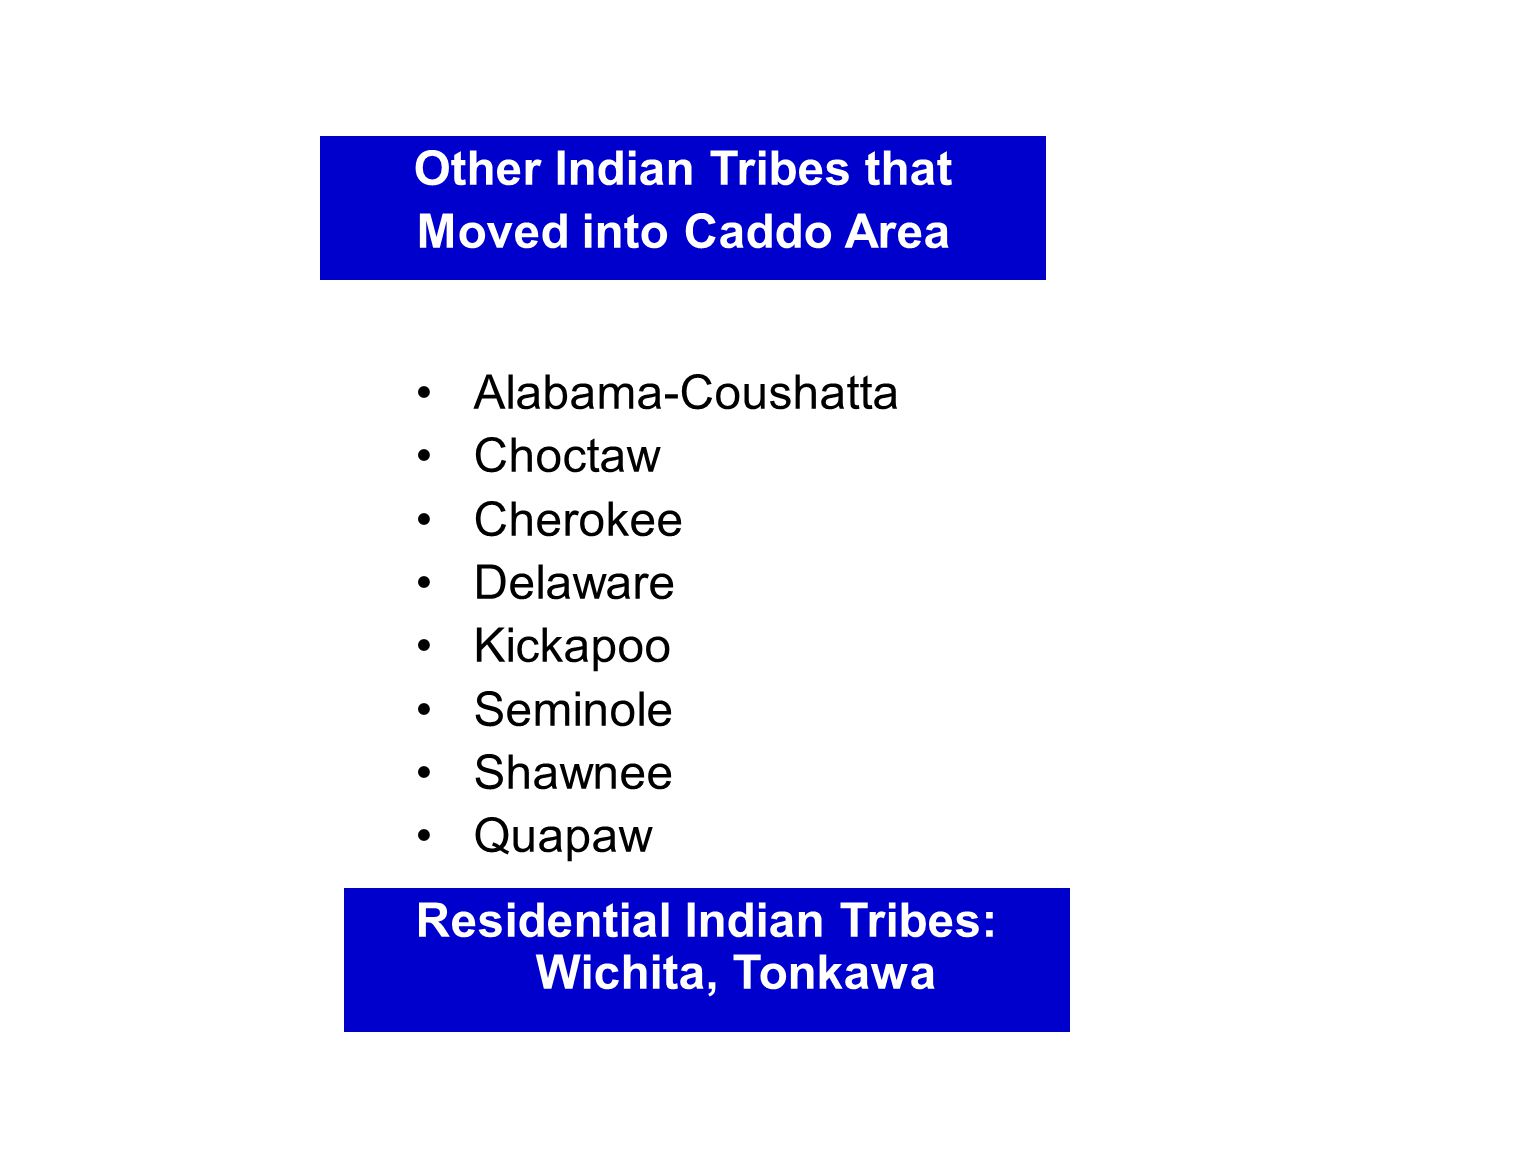 Other Indian Tribes that Residential Indian Tribes: Wichita, Tonkawa